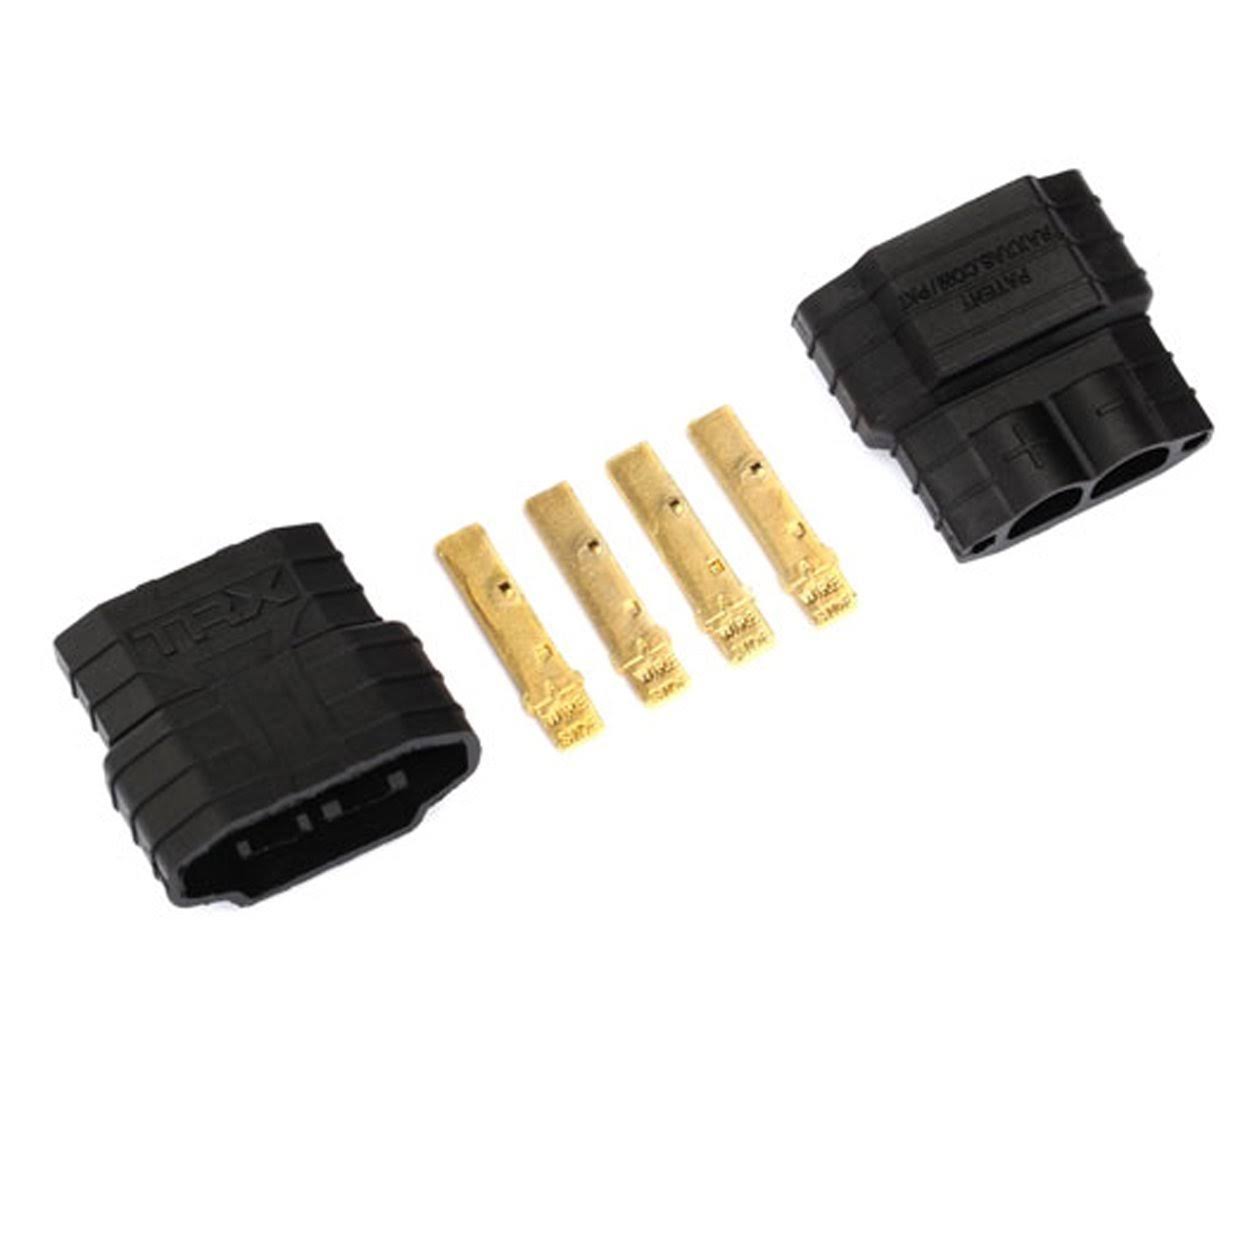 Traxxas 3070x Connector Pack - 2pk, Male